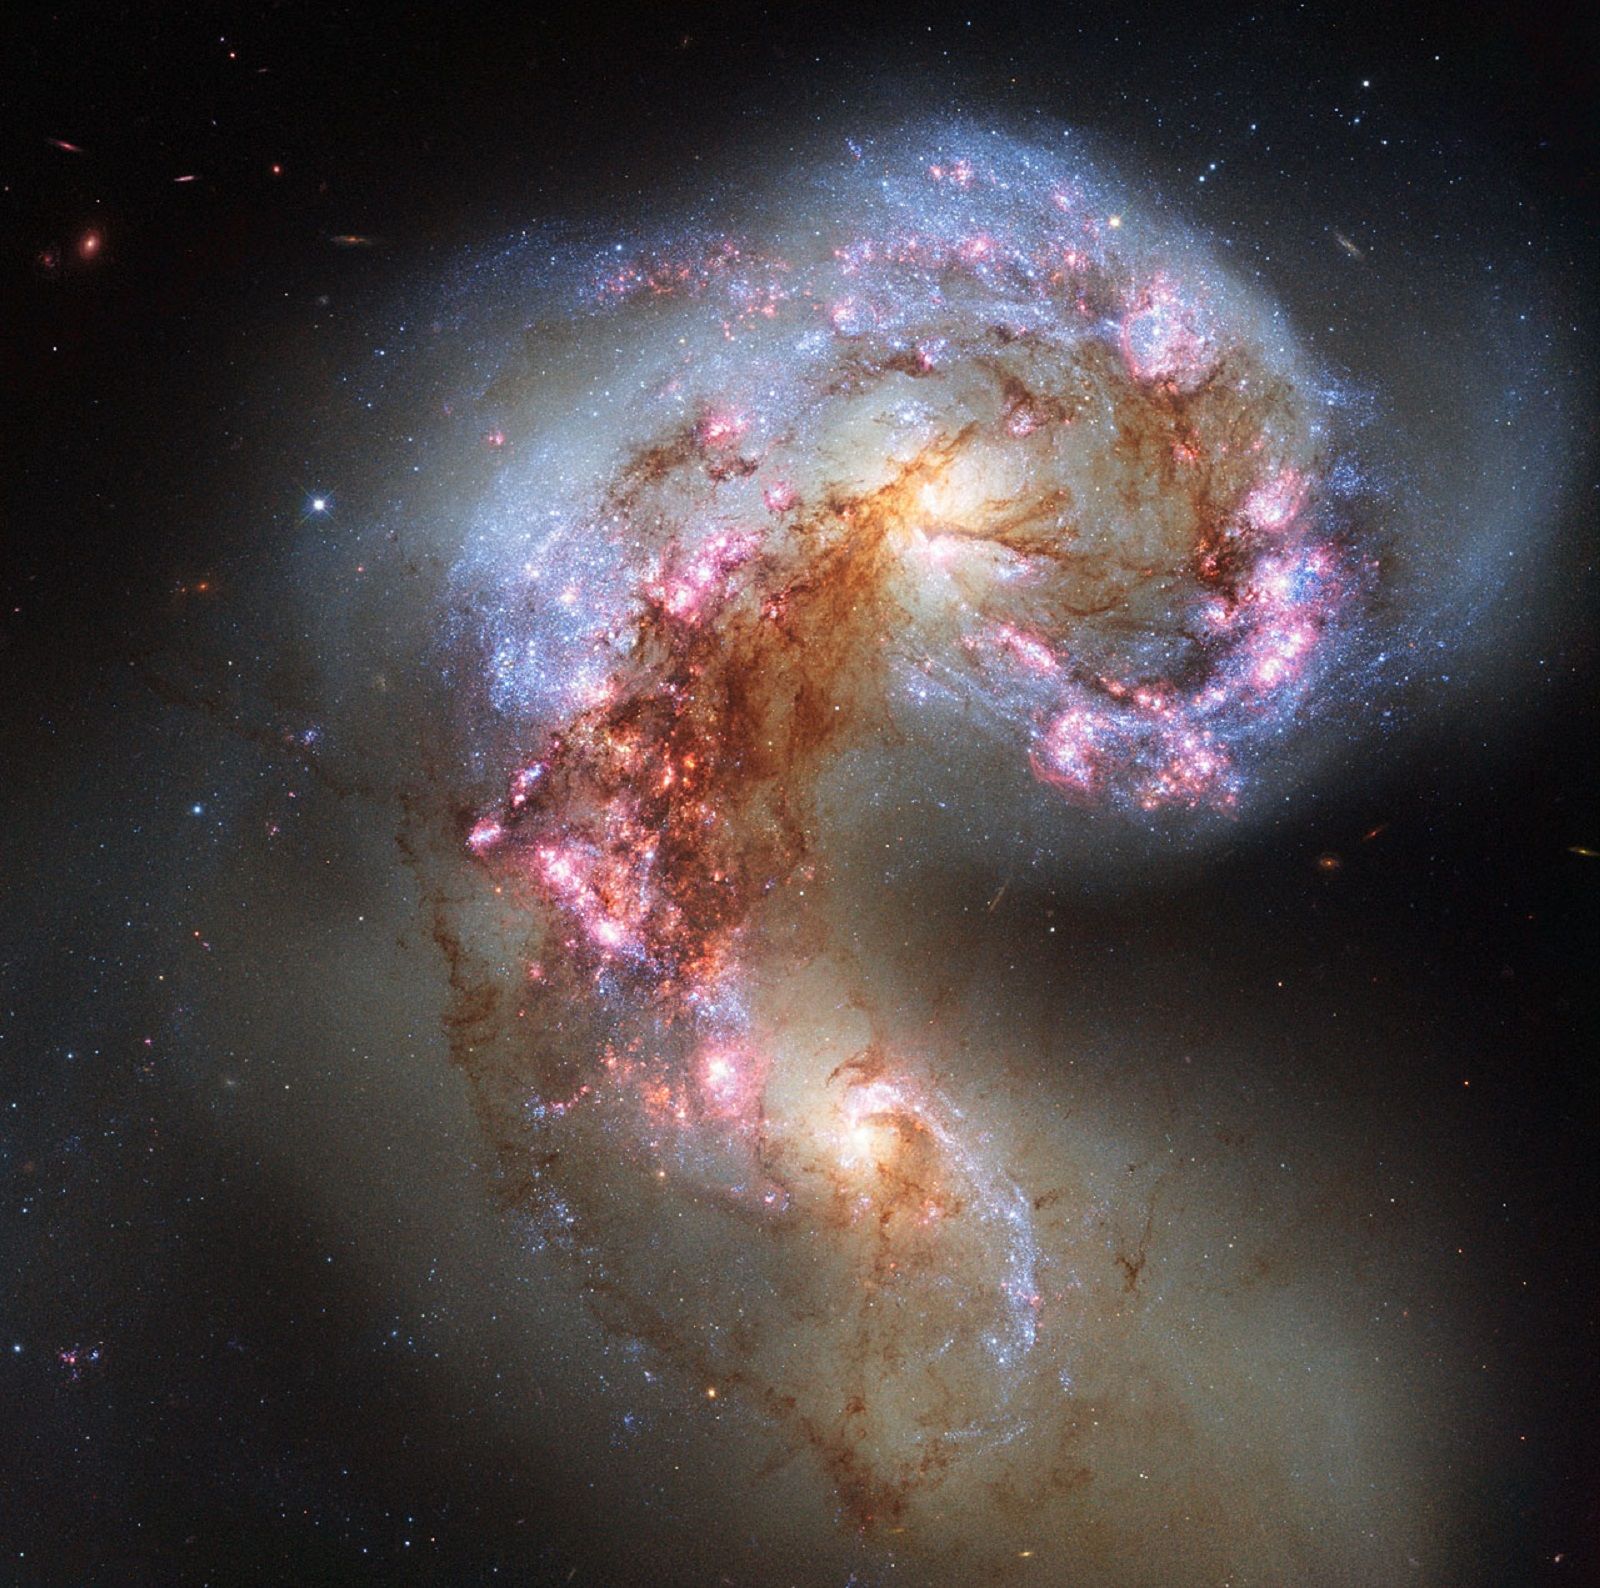 Astounding images from the depths of the Universe courtesy of the Hubble Space Telescope image 7